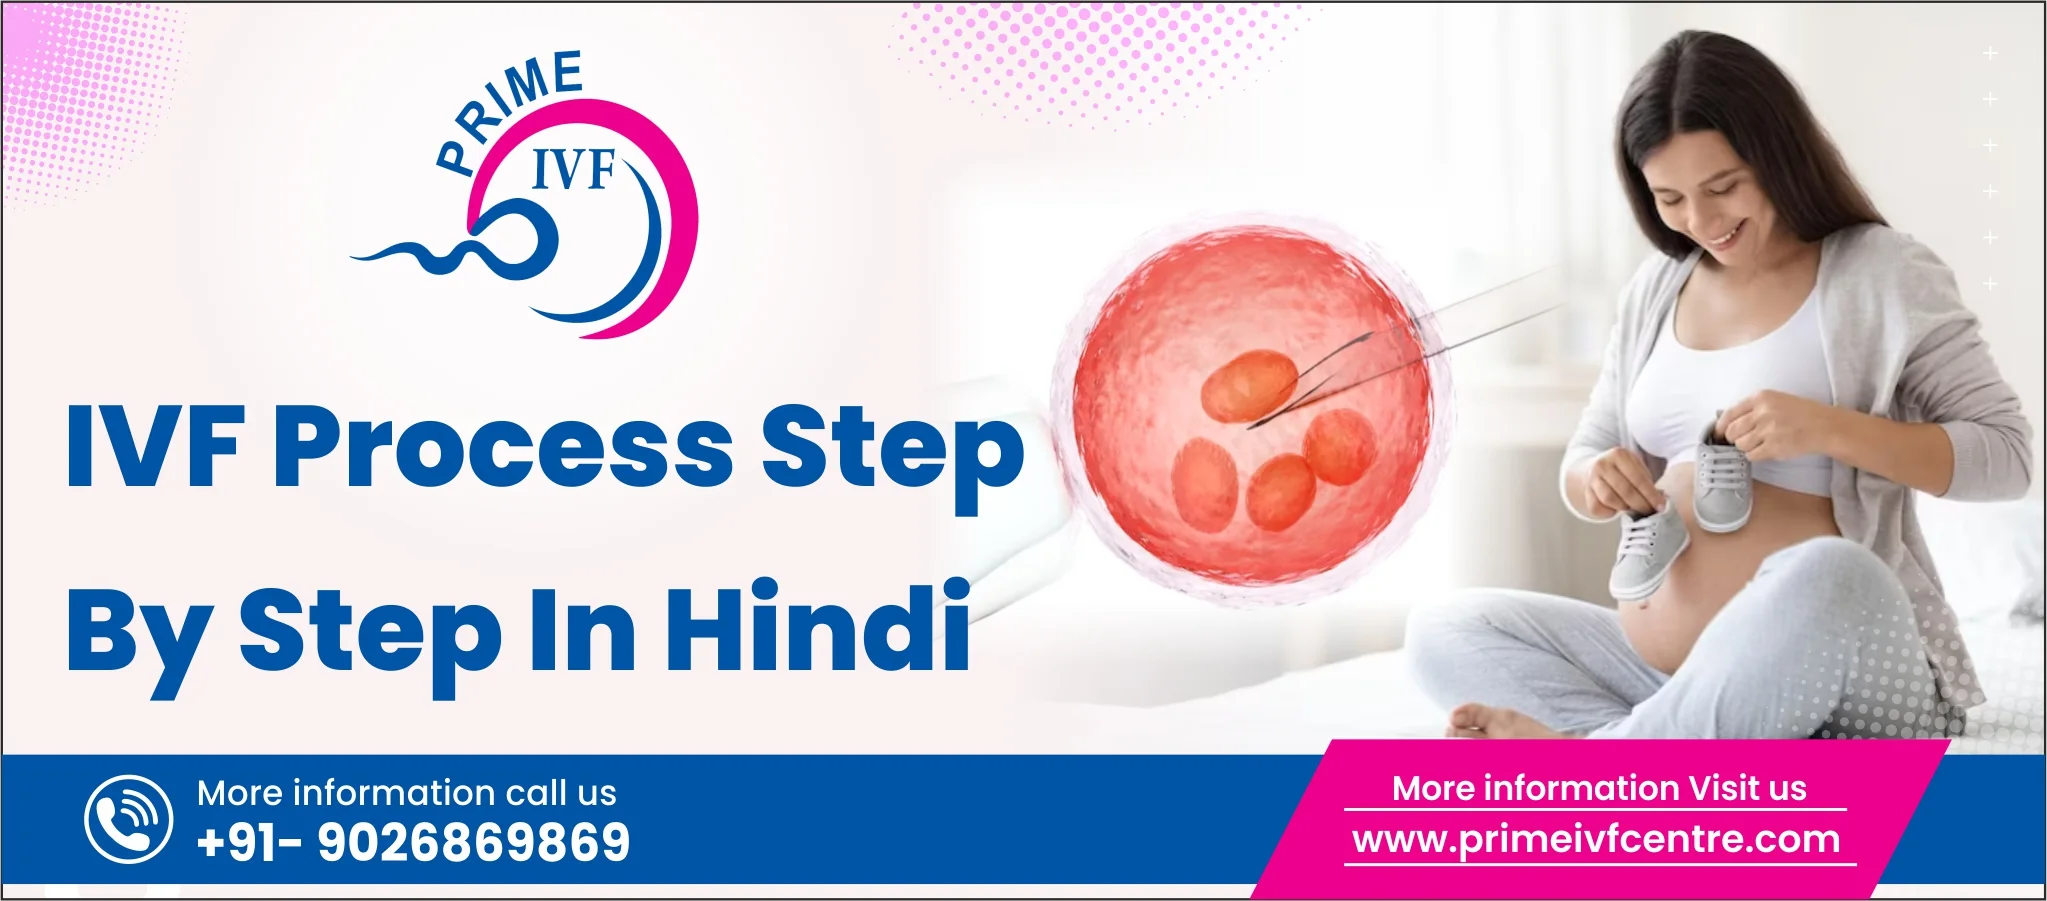 IVF Process Step By Step In Hindi